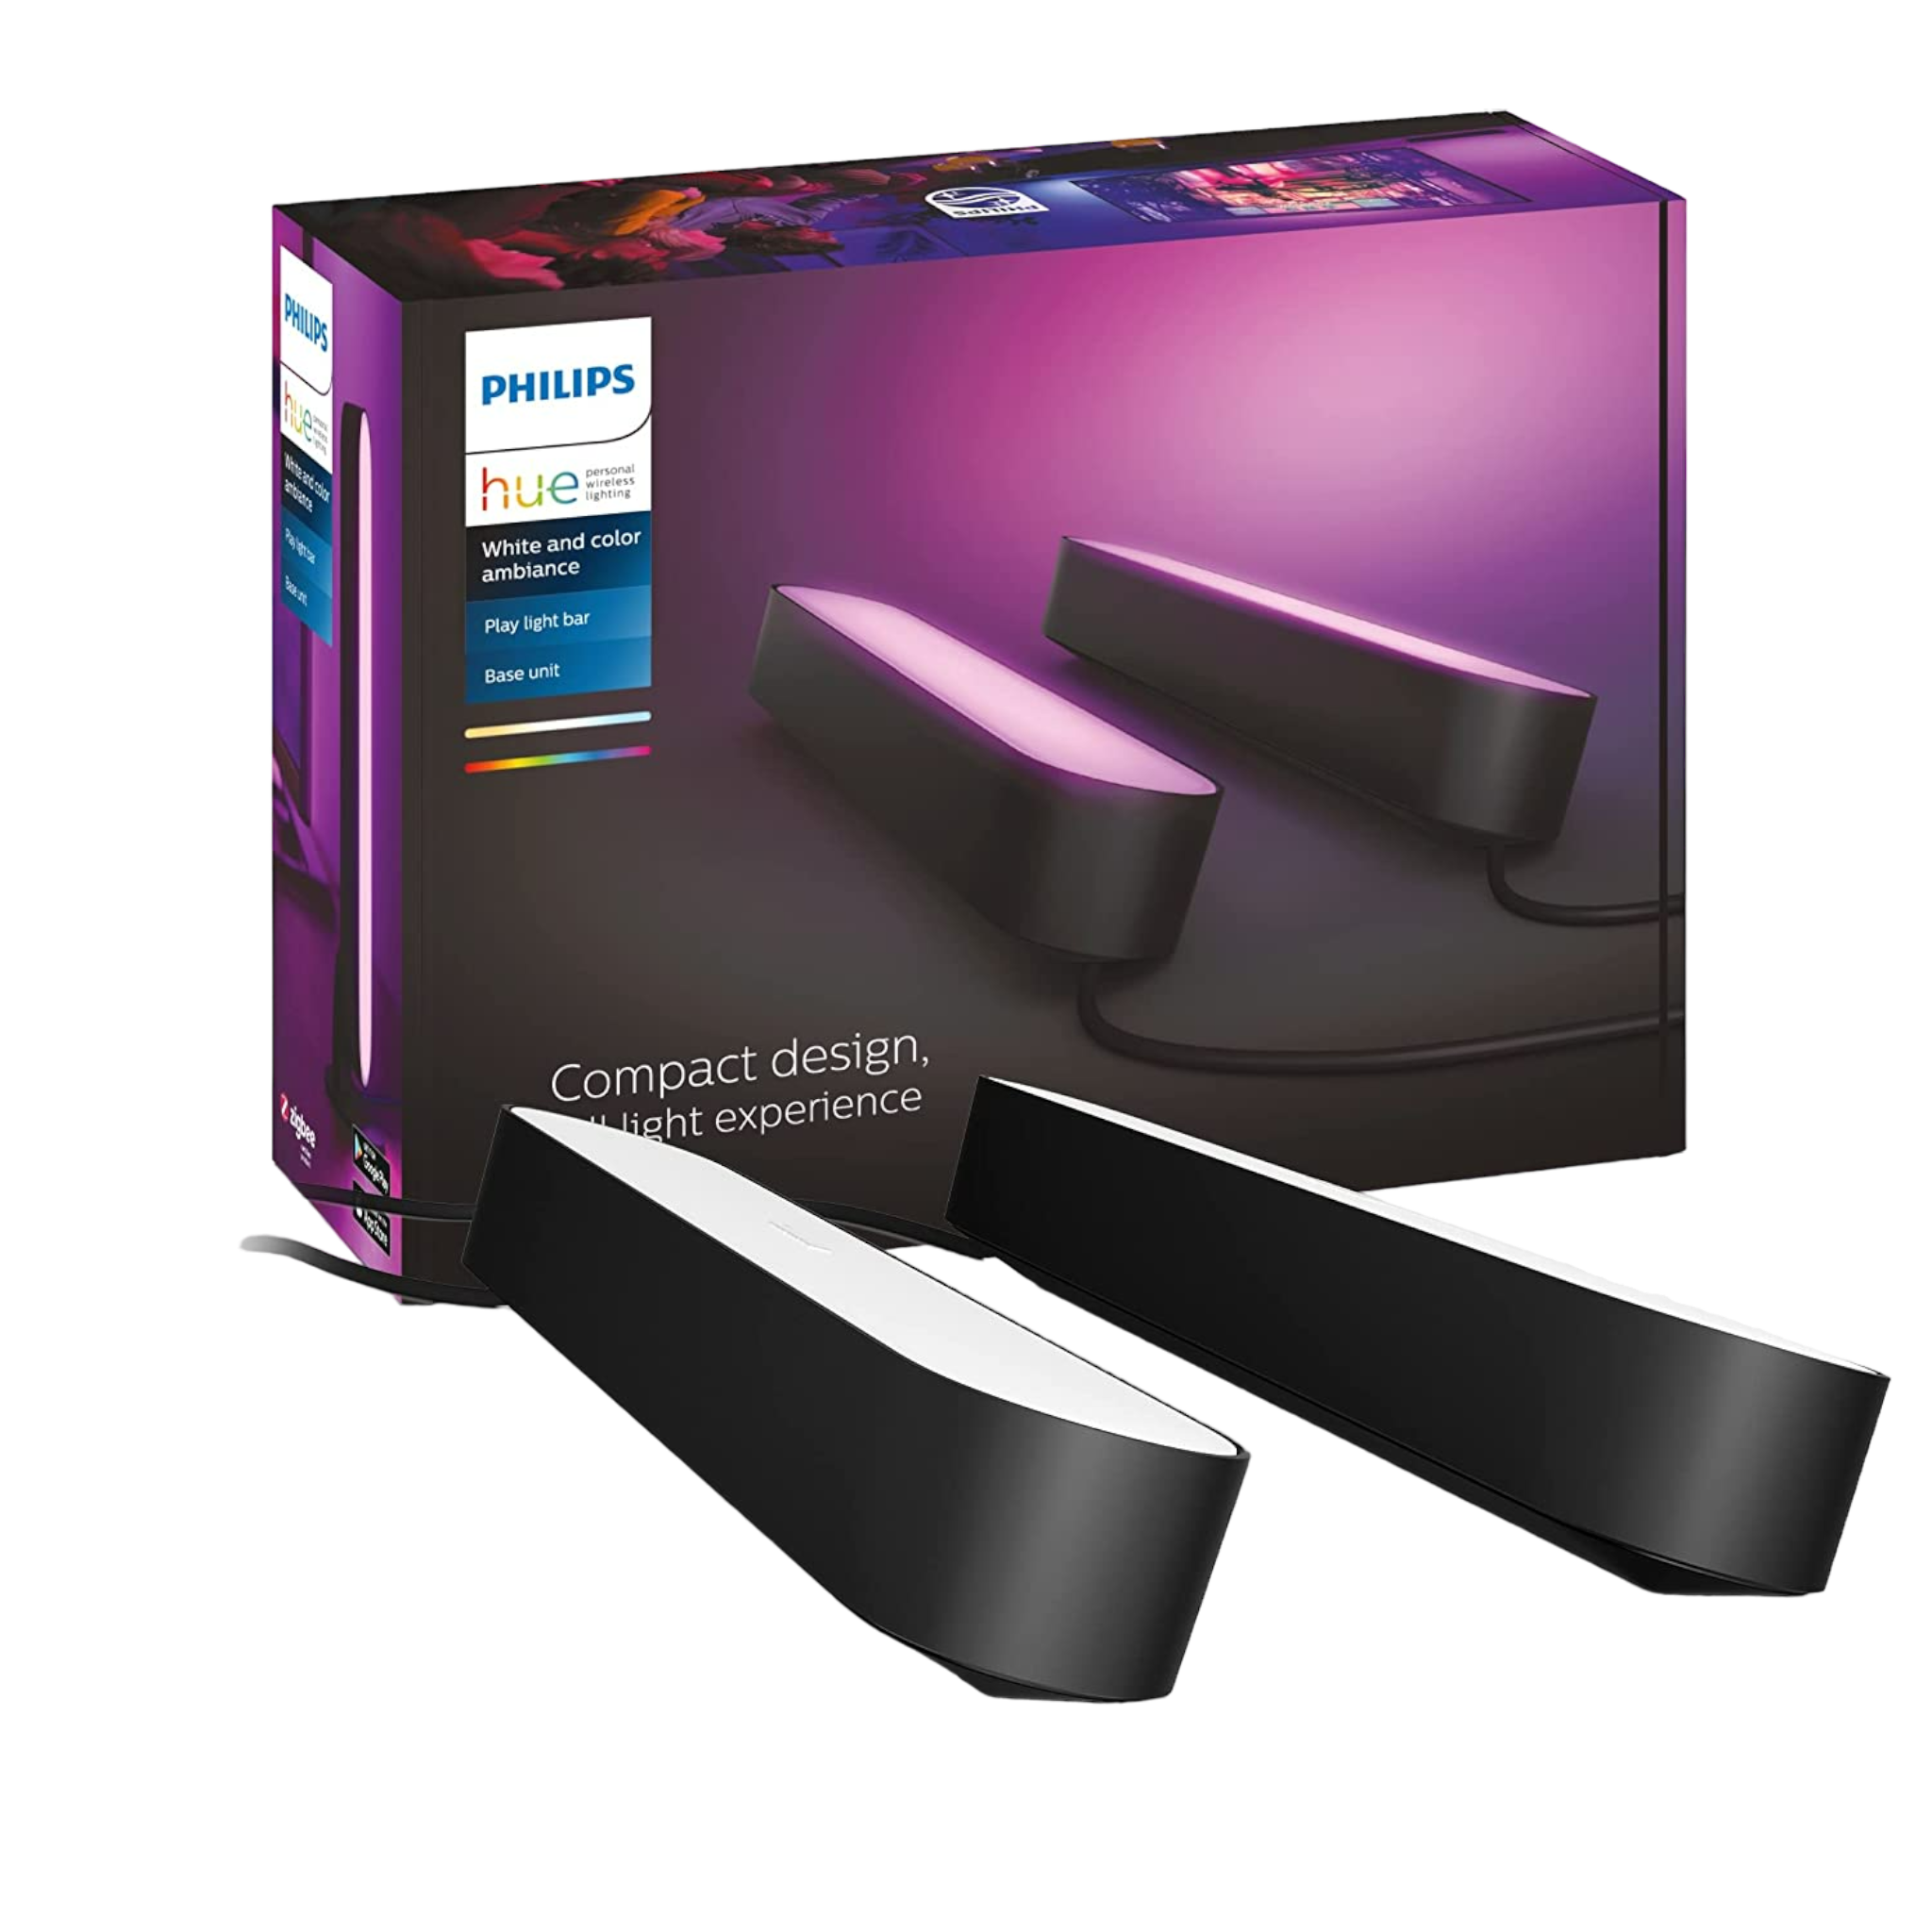 Philips Hue Play White & Color Smart Light, 2 Pack Base Kit, Hub Required - Pro-Distributing